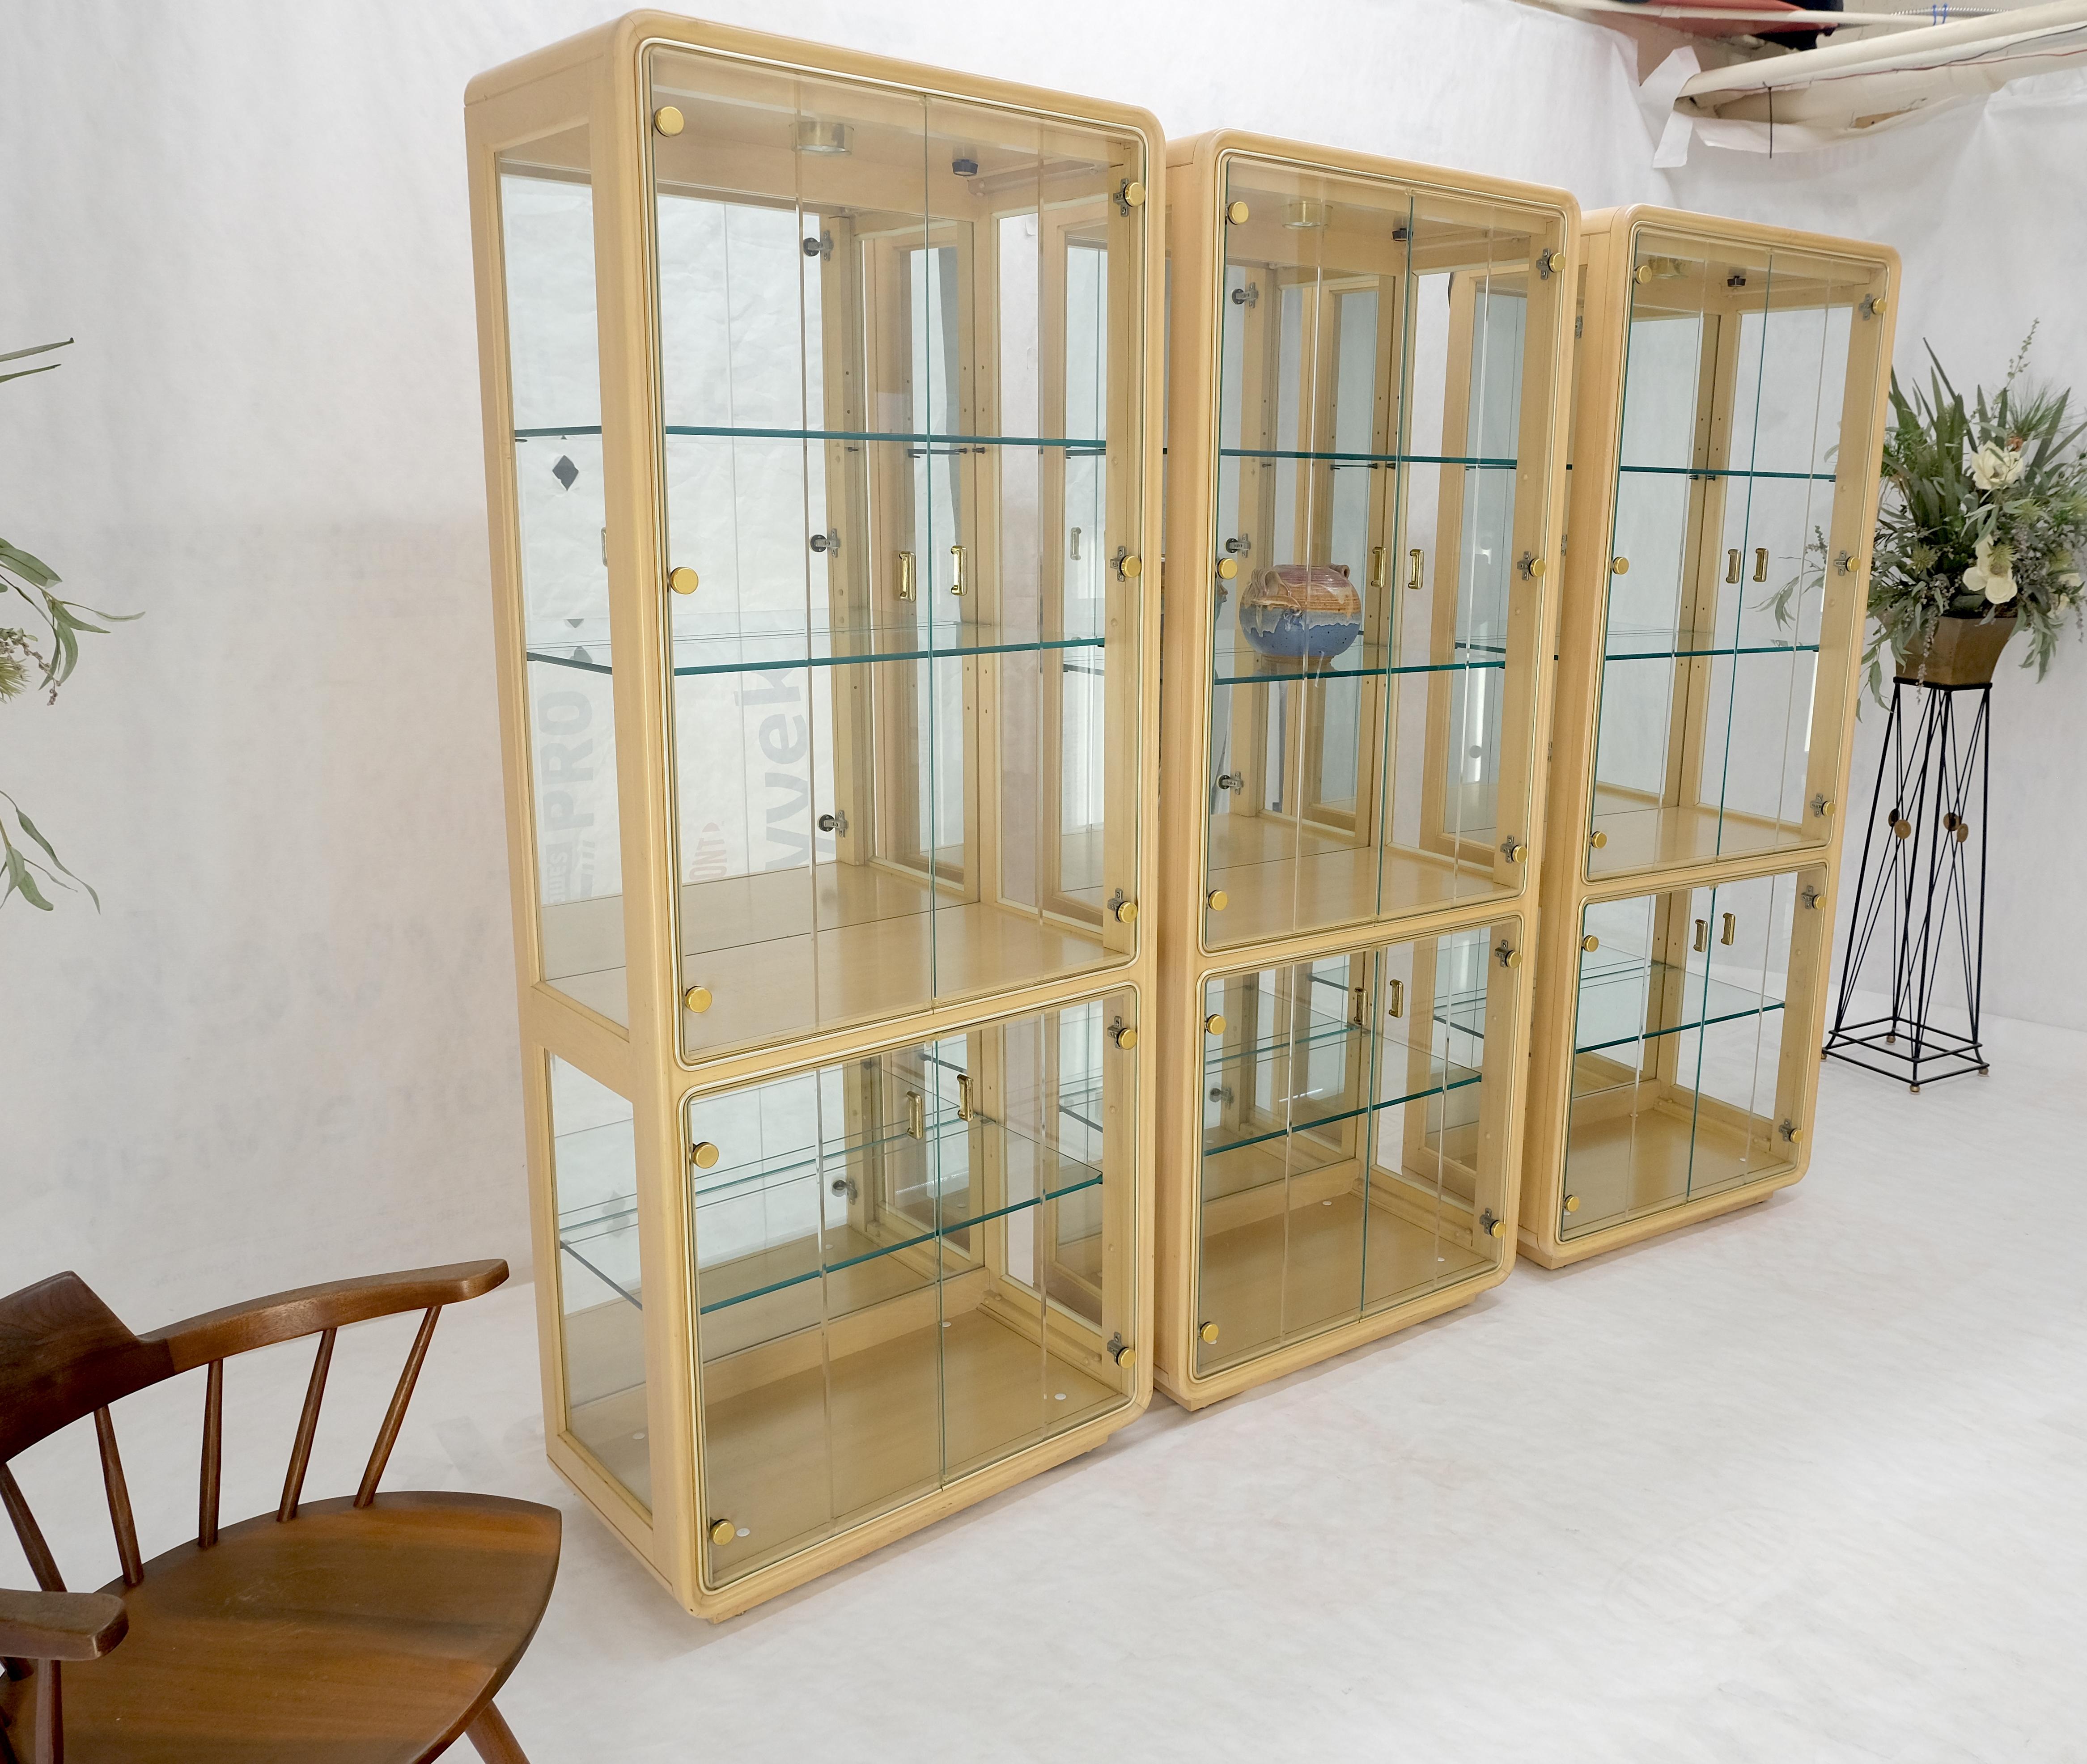 3 Blond Wood Glass Door Curio Cases Display Vitrine Cabinet Glass Shelves MINT! For Sale 3